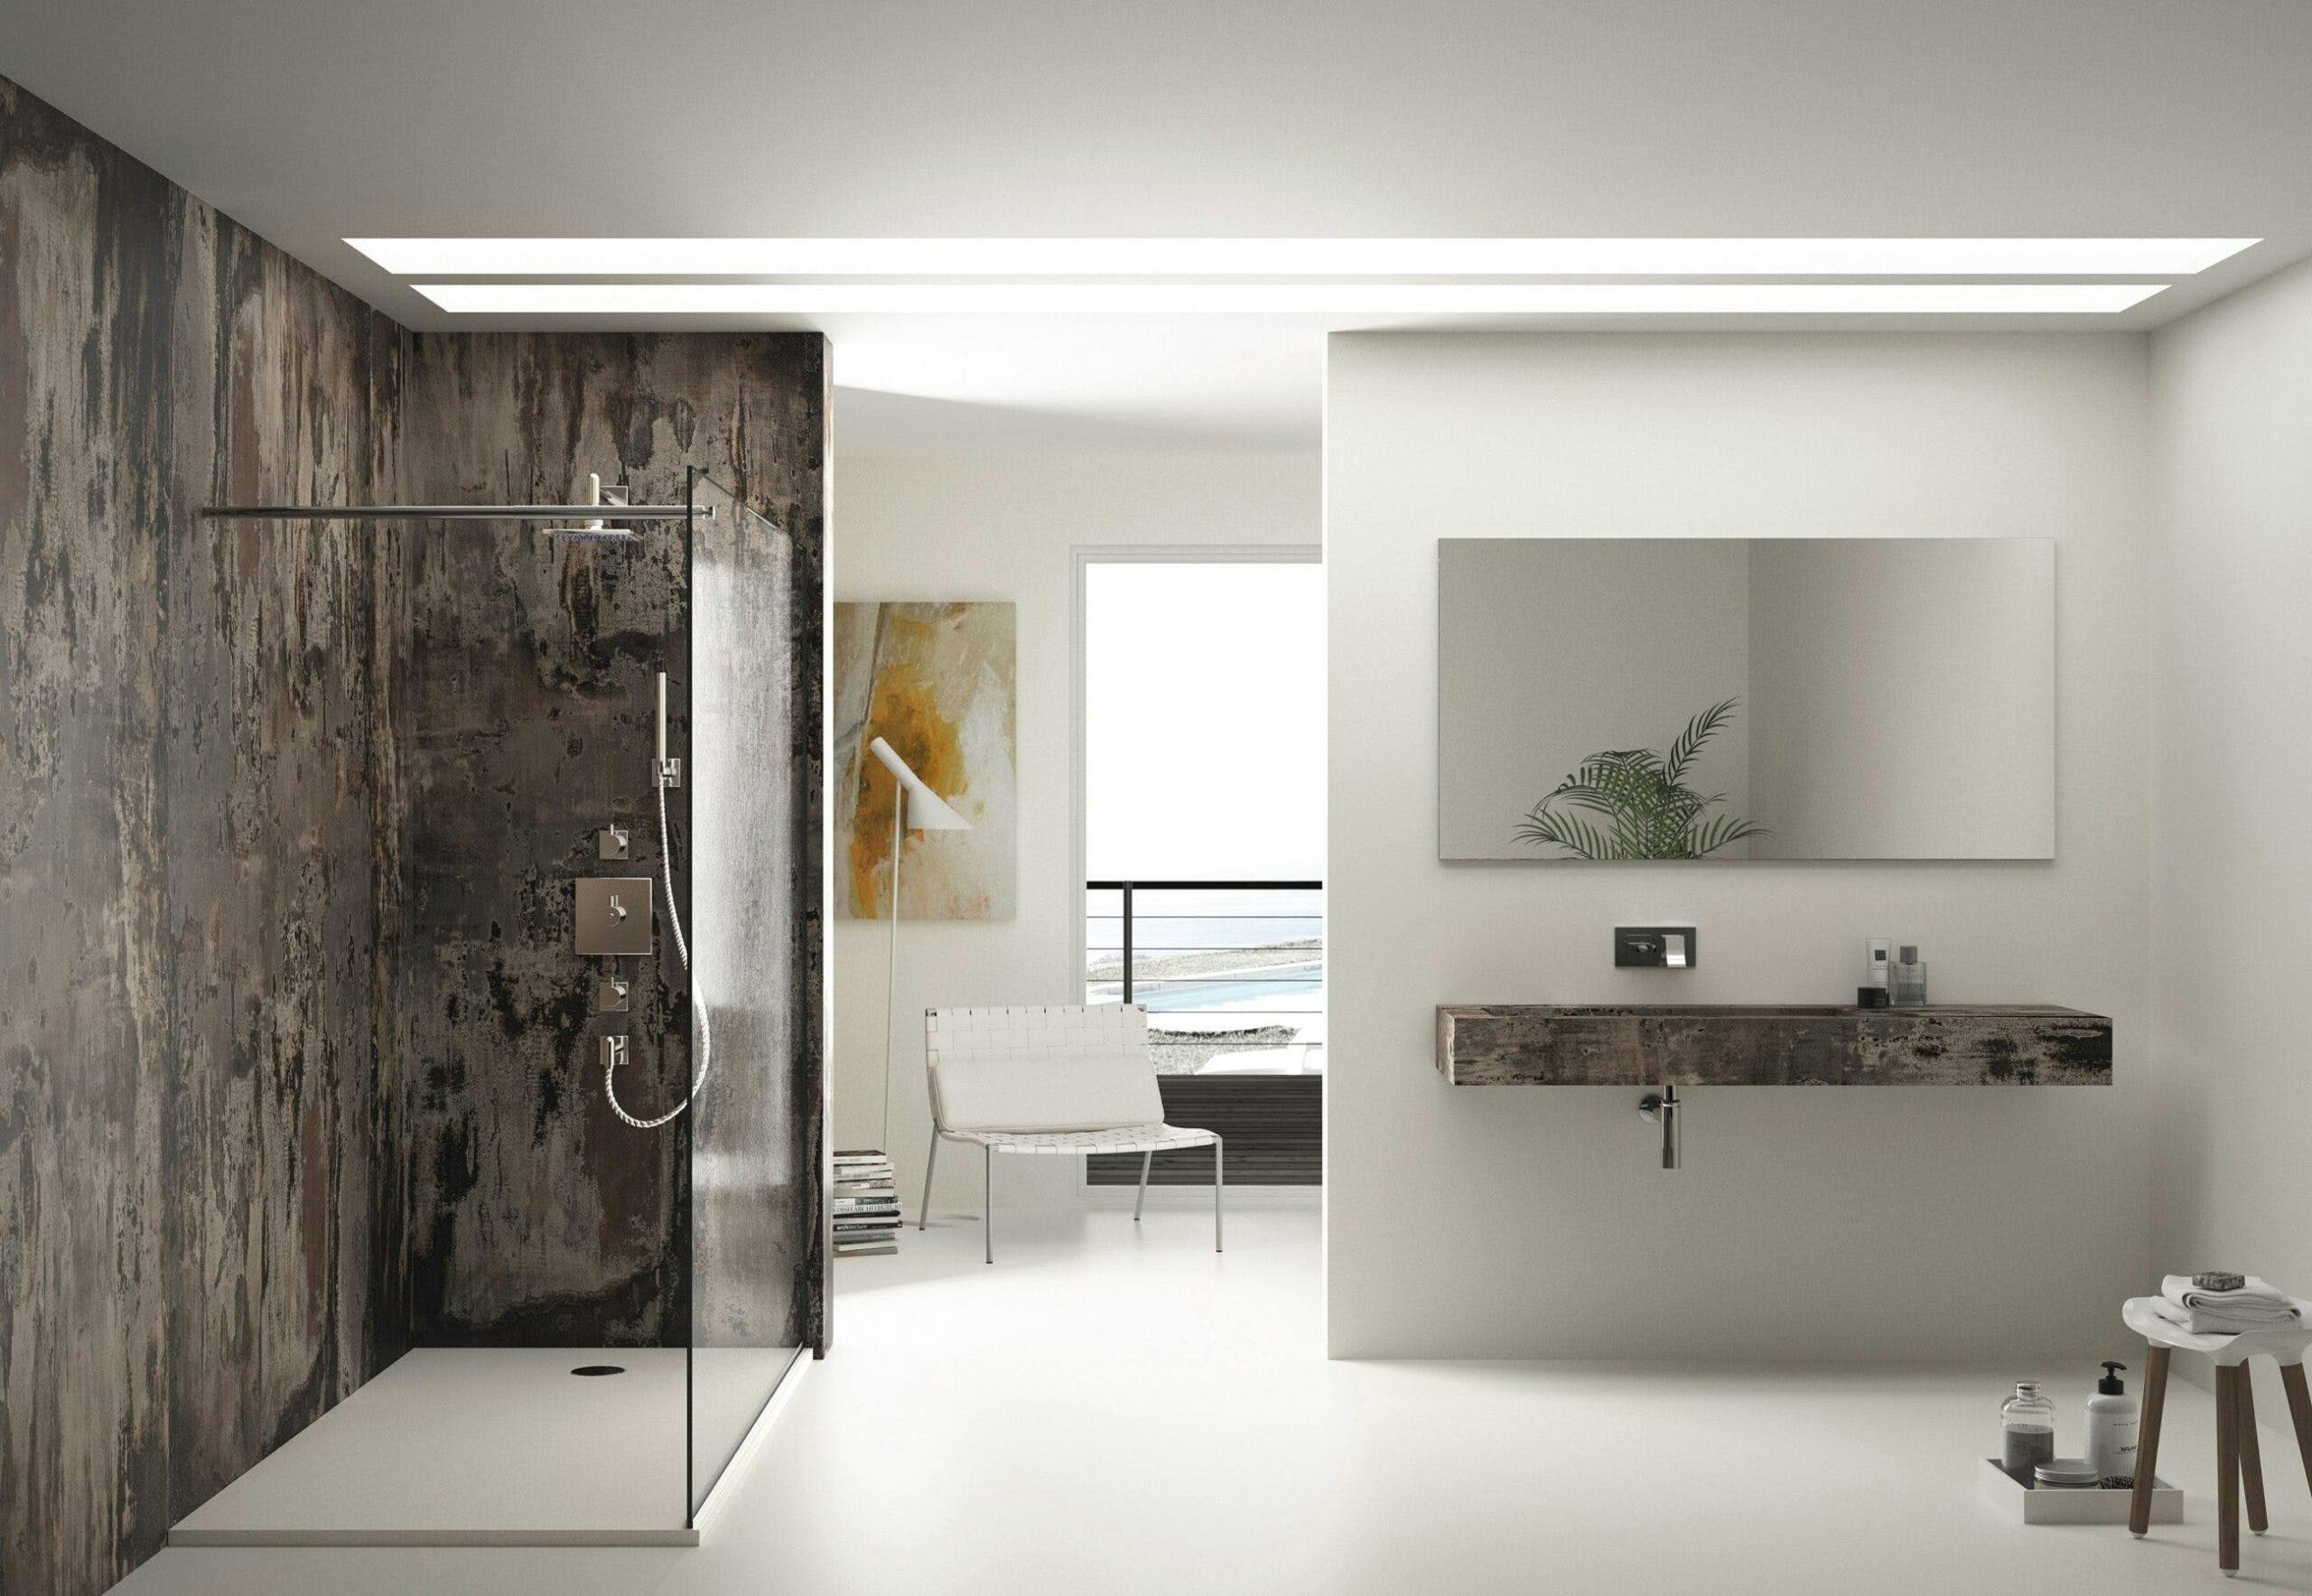 Image 33 of Cosentino Bath Collection Lavabo REFLECTION 1 1 scaled in The Cosentino Group debuts at Cersaie 2019 as part of the "Famous Bathrooms" exhibition - Cosentino